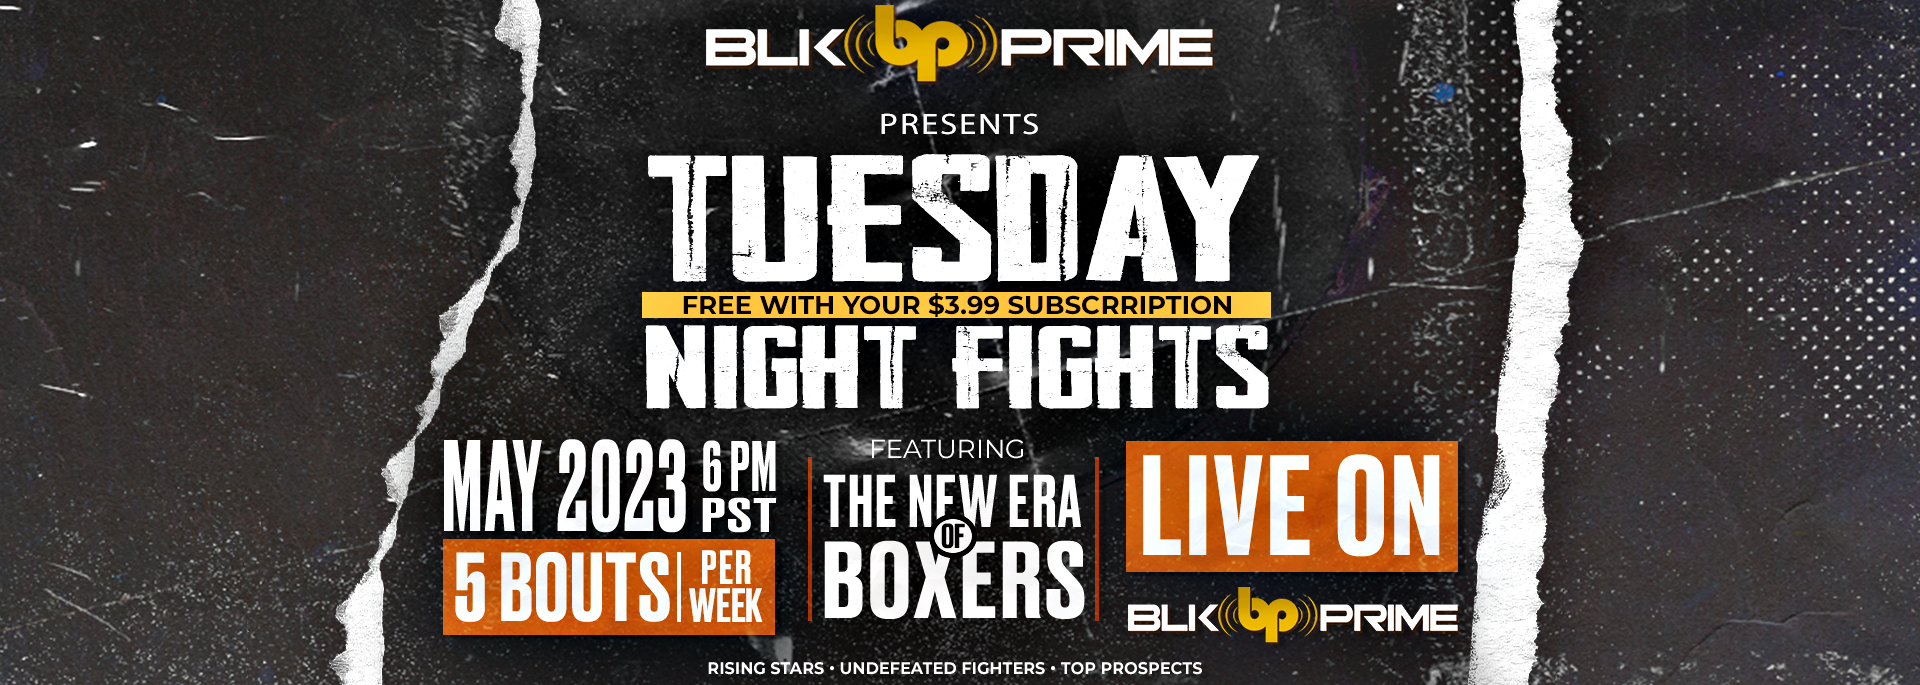 BLKPRIME Presents Tuesday Night Fights